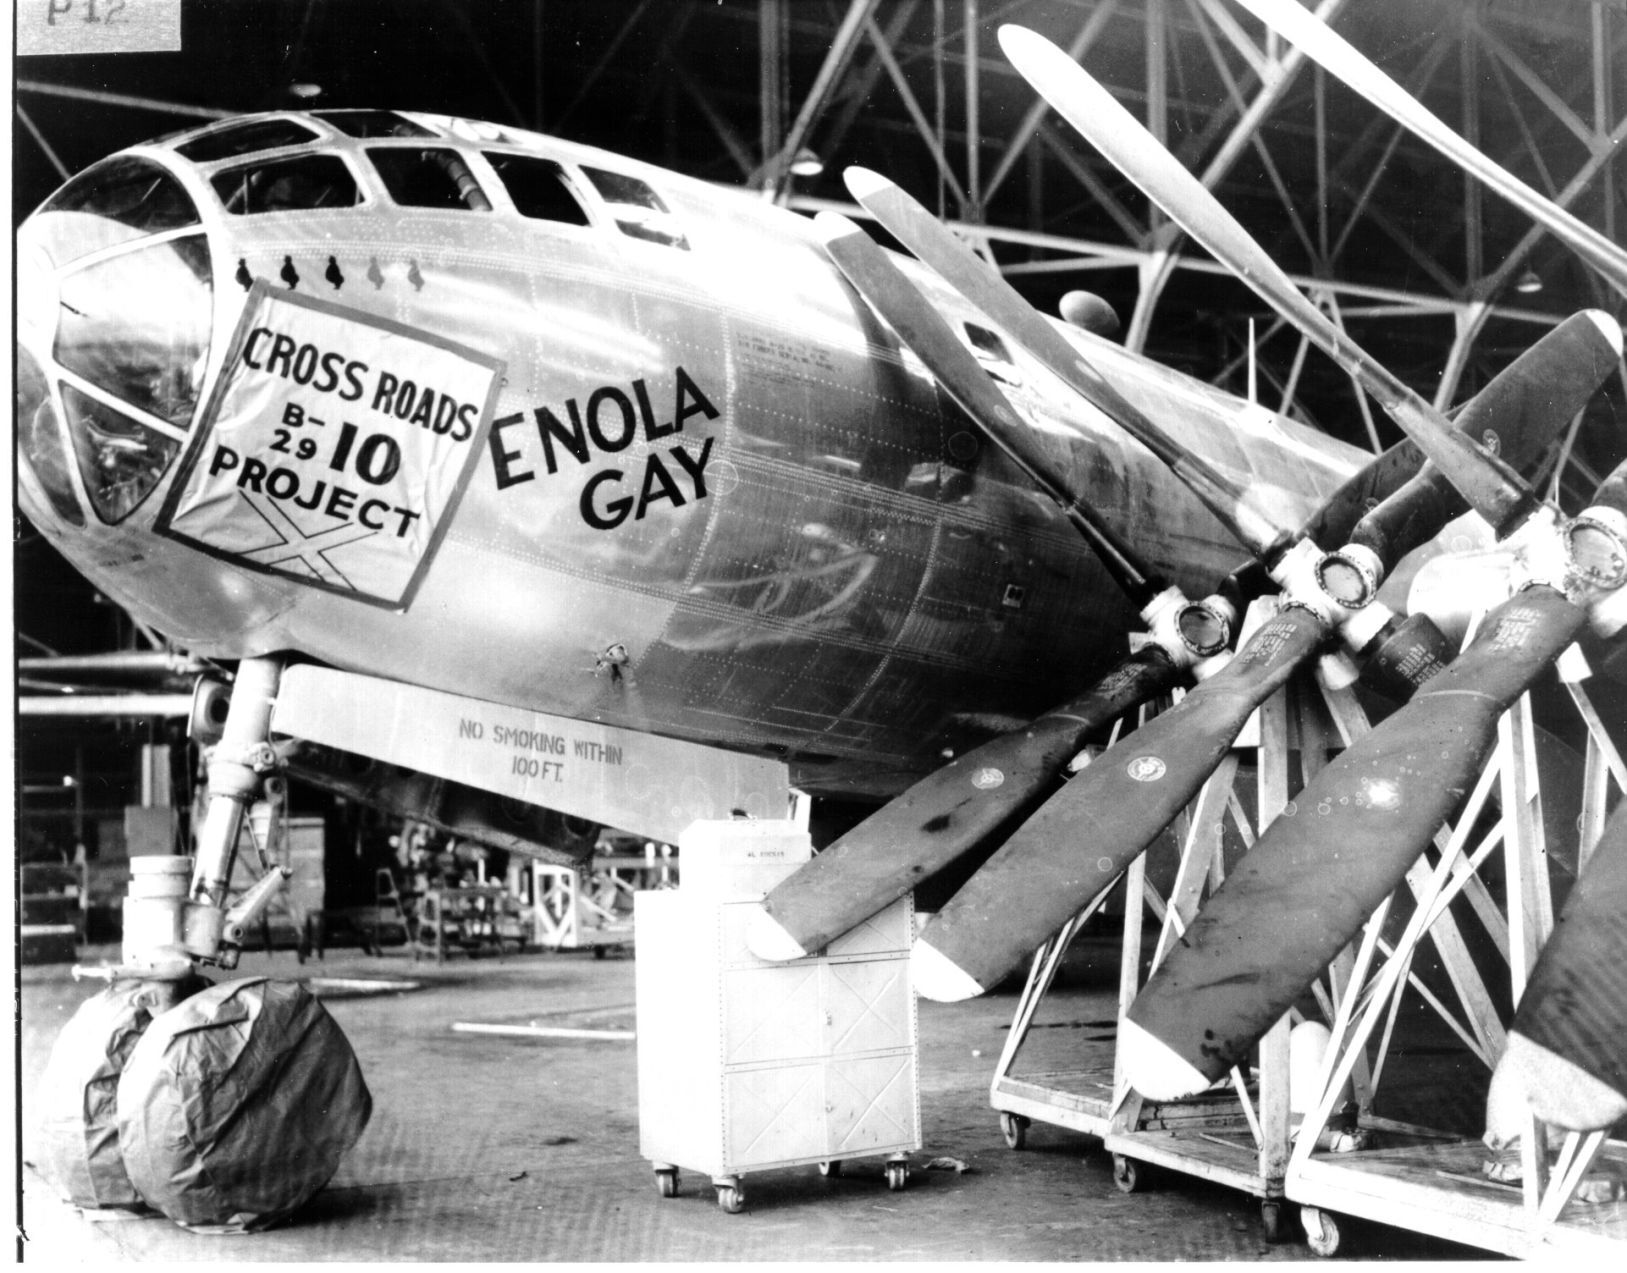 passangers and pilot of enola gay